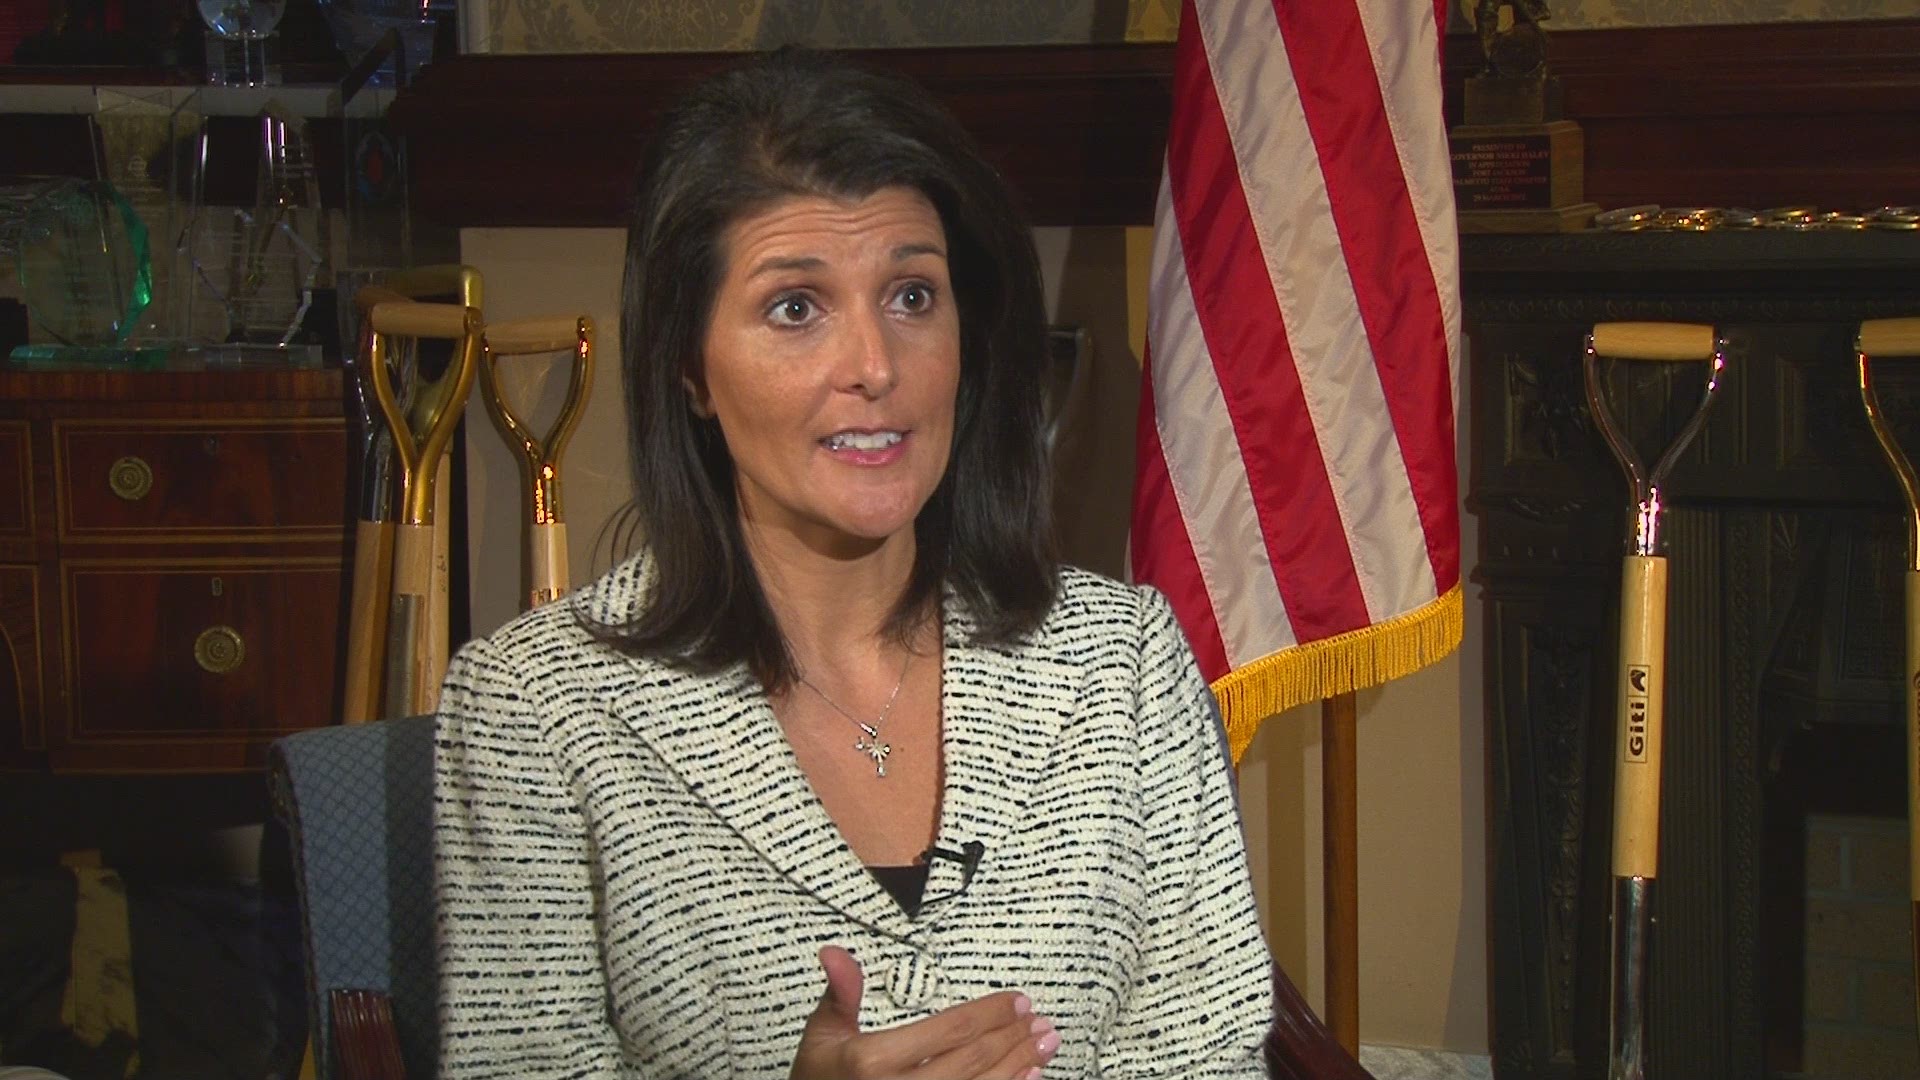 News19's JR Berry sat down with Governor Nikki Haley to reflect on it being one year since the flood.